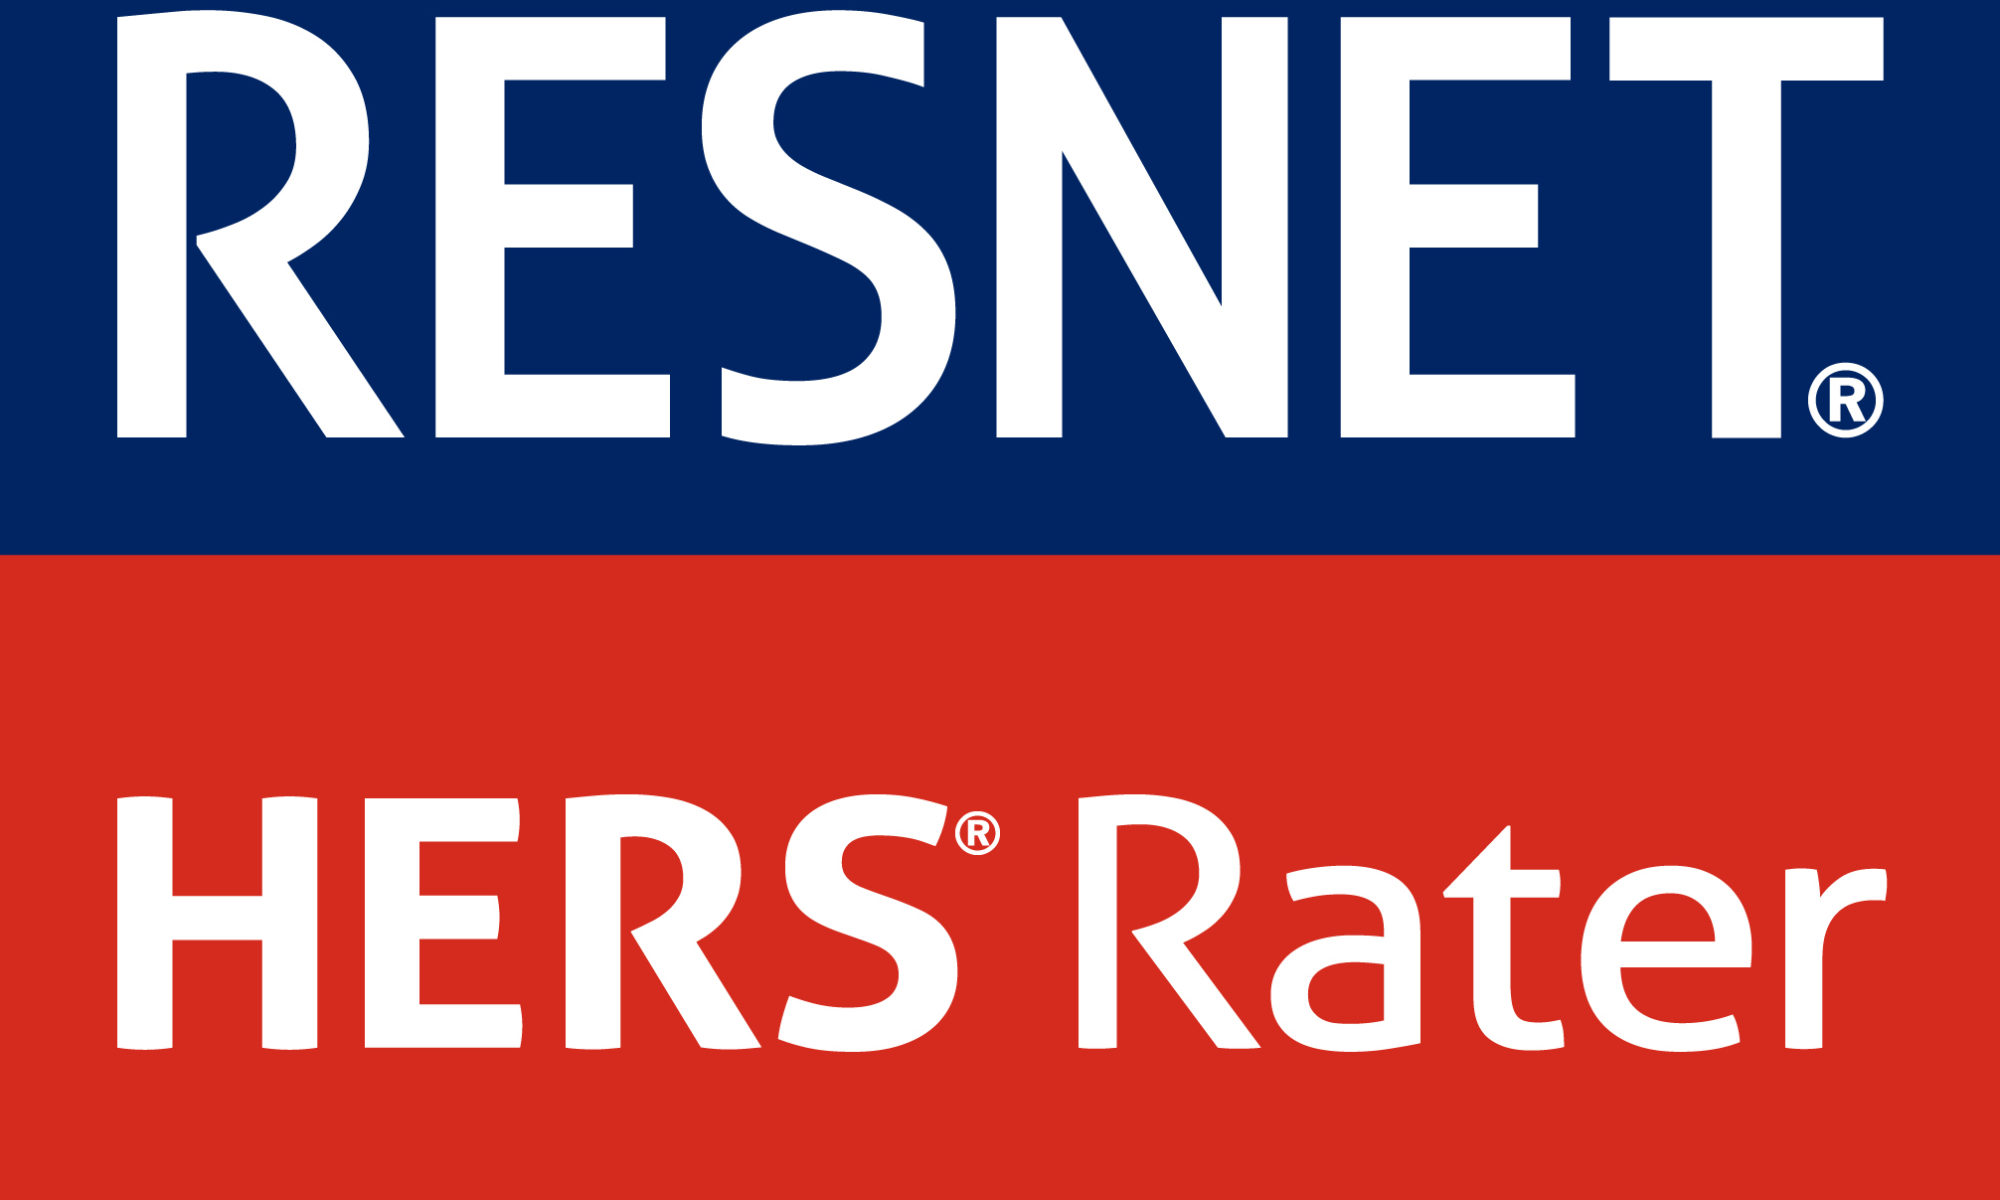 RESNET_HERS_Rater_Palm Beach Florida